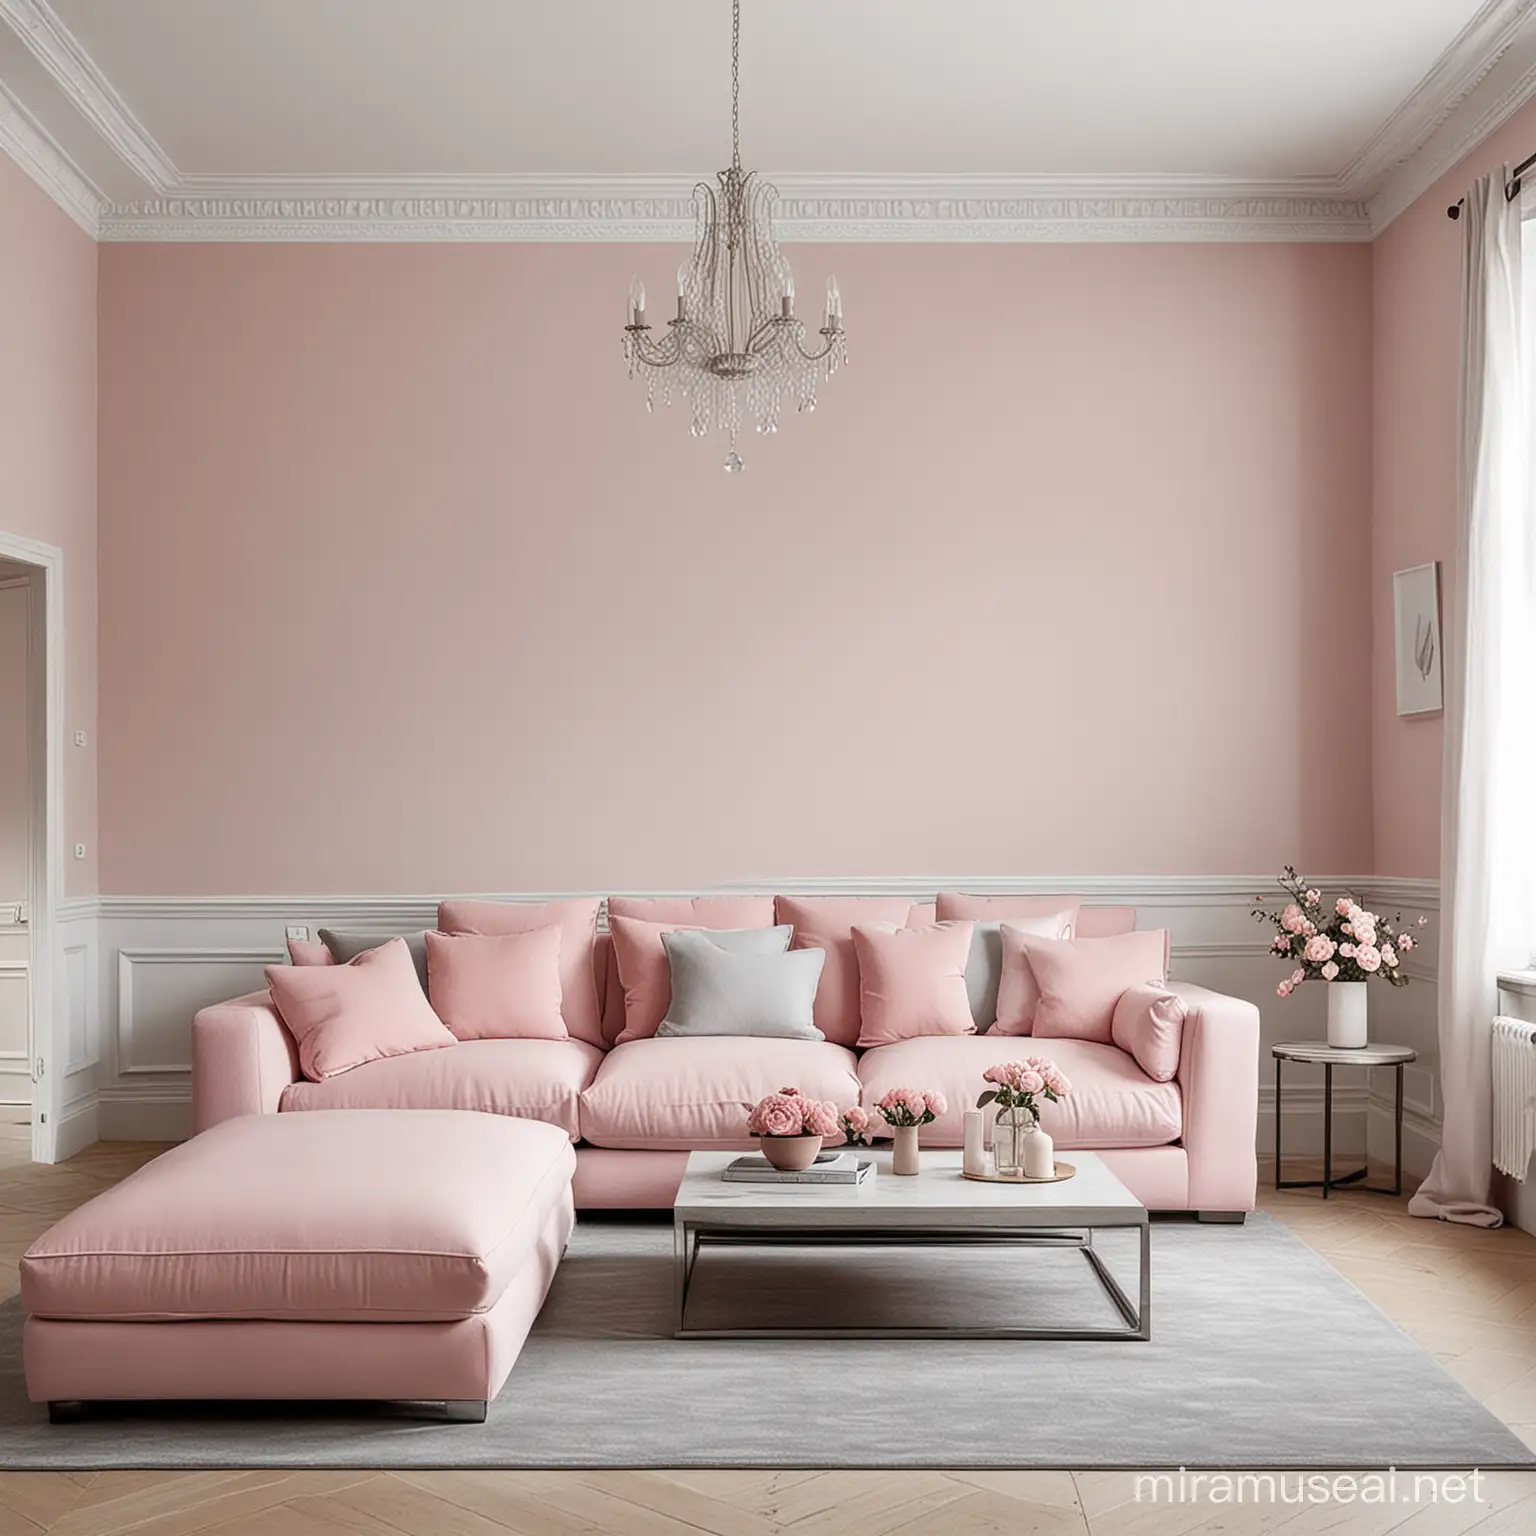 Cozy Interior with Soft Pink and Light Gray Dcor